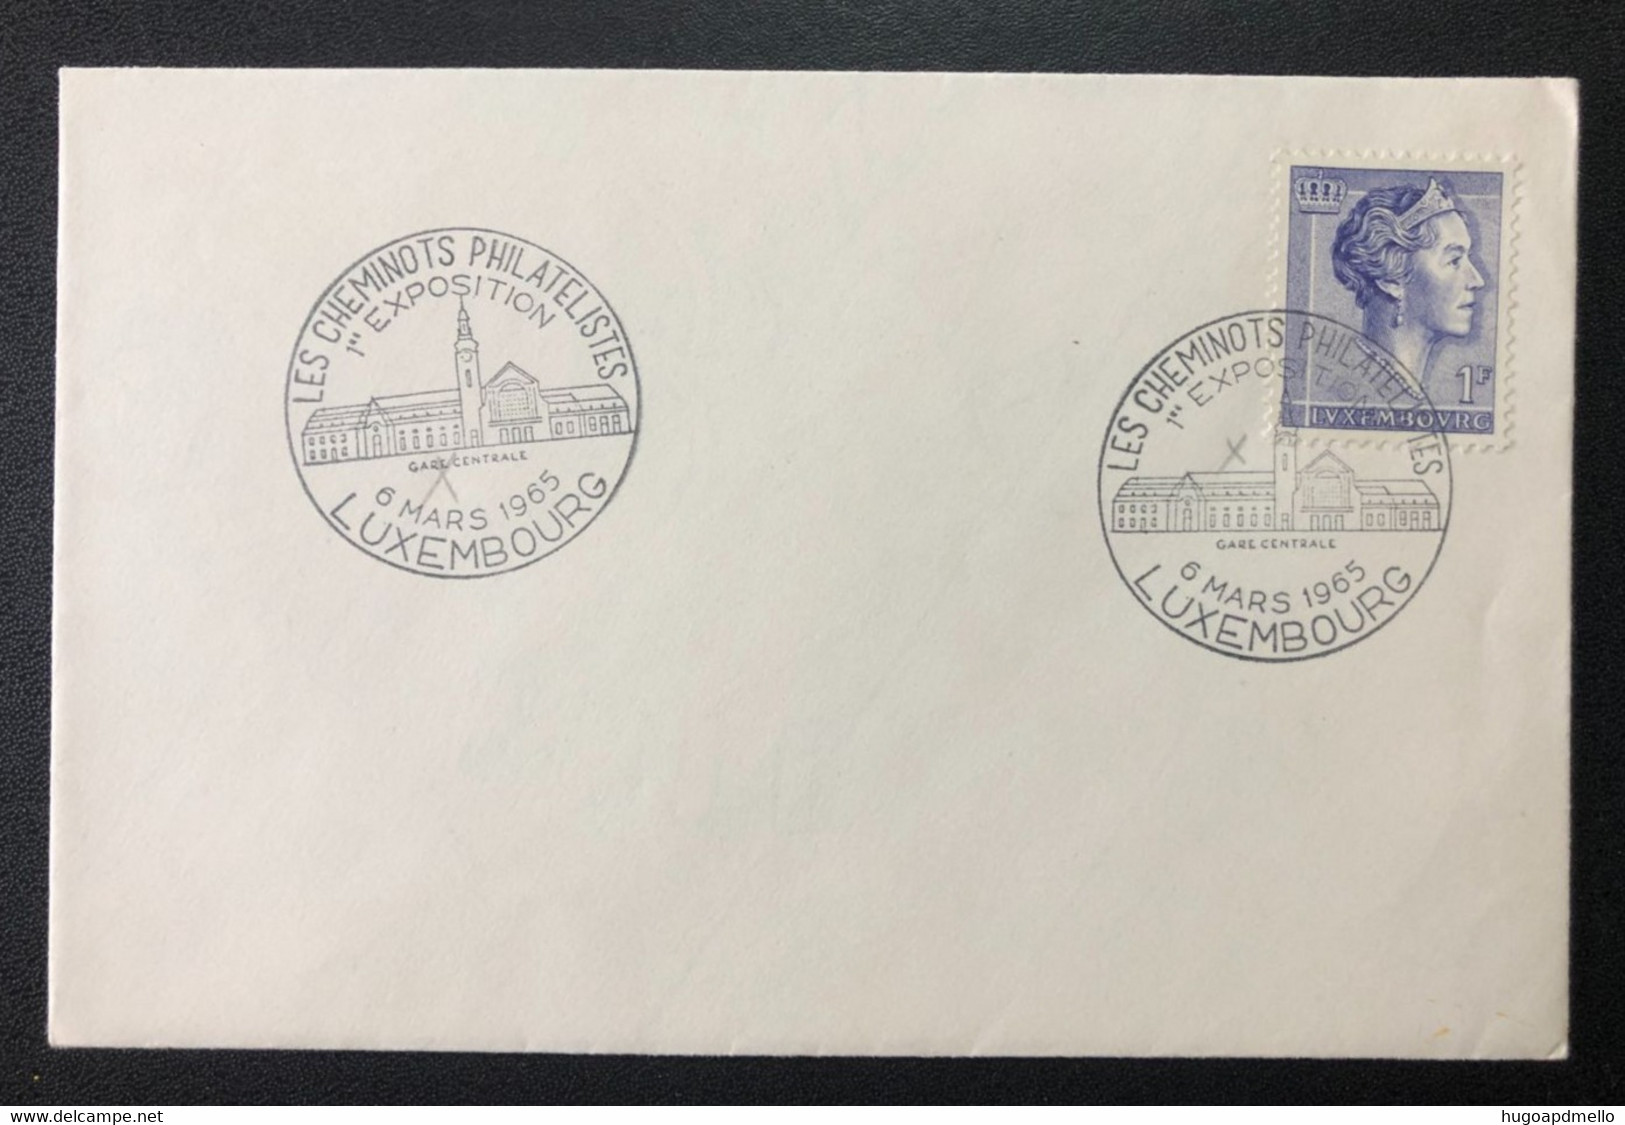 LUXEMBOURG, «1ère Exposition Les Cheminots Philatelistes »,  With Special Postmark, 1965 - Storia Postale